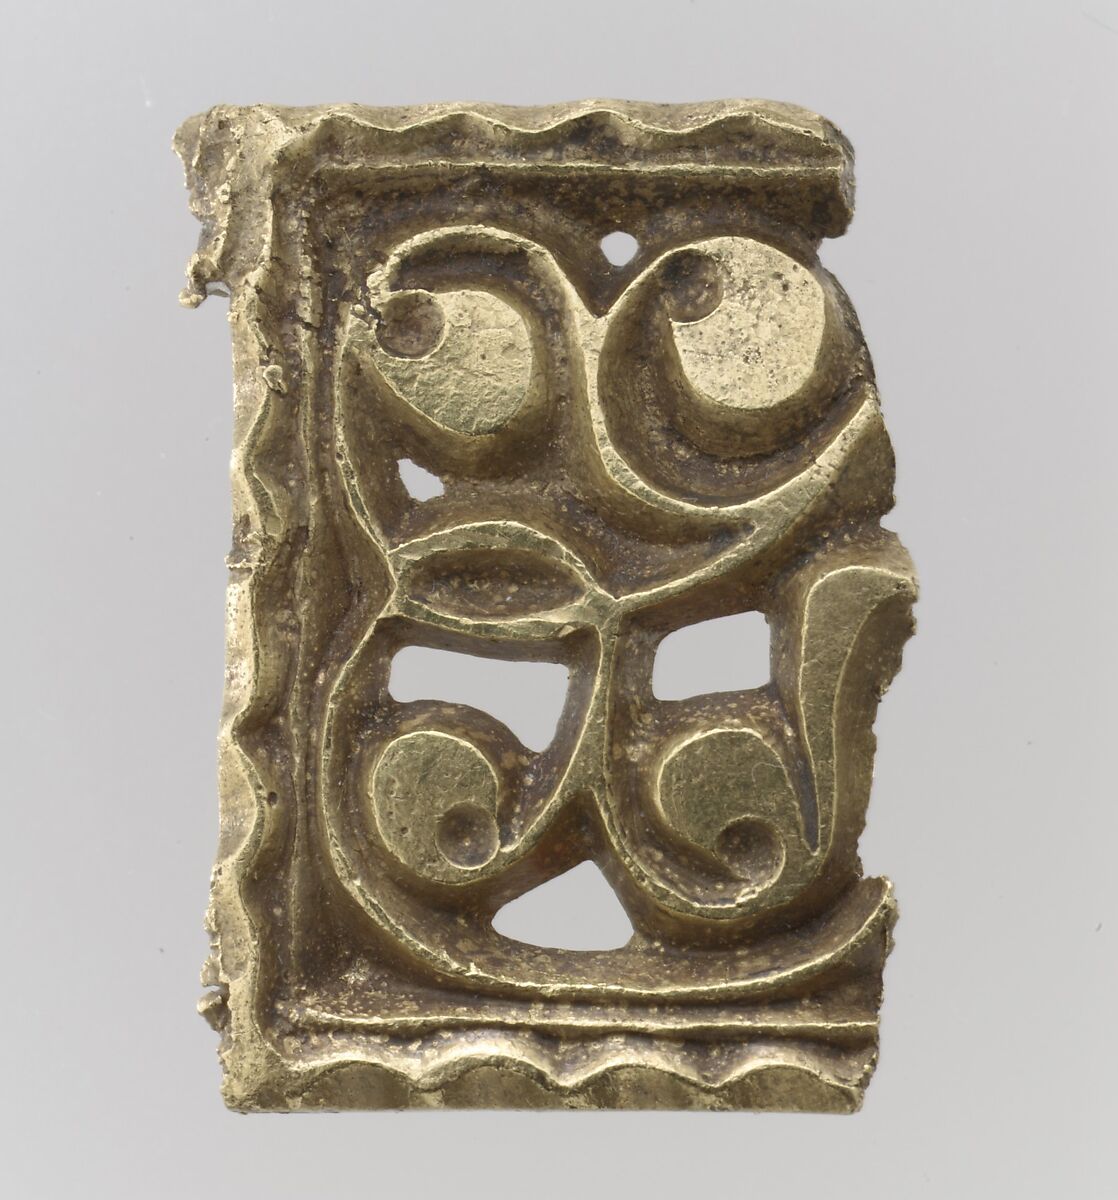 Fragment of a Gold Attachment Plate for a Buckle, Gold, Avar 